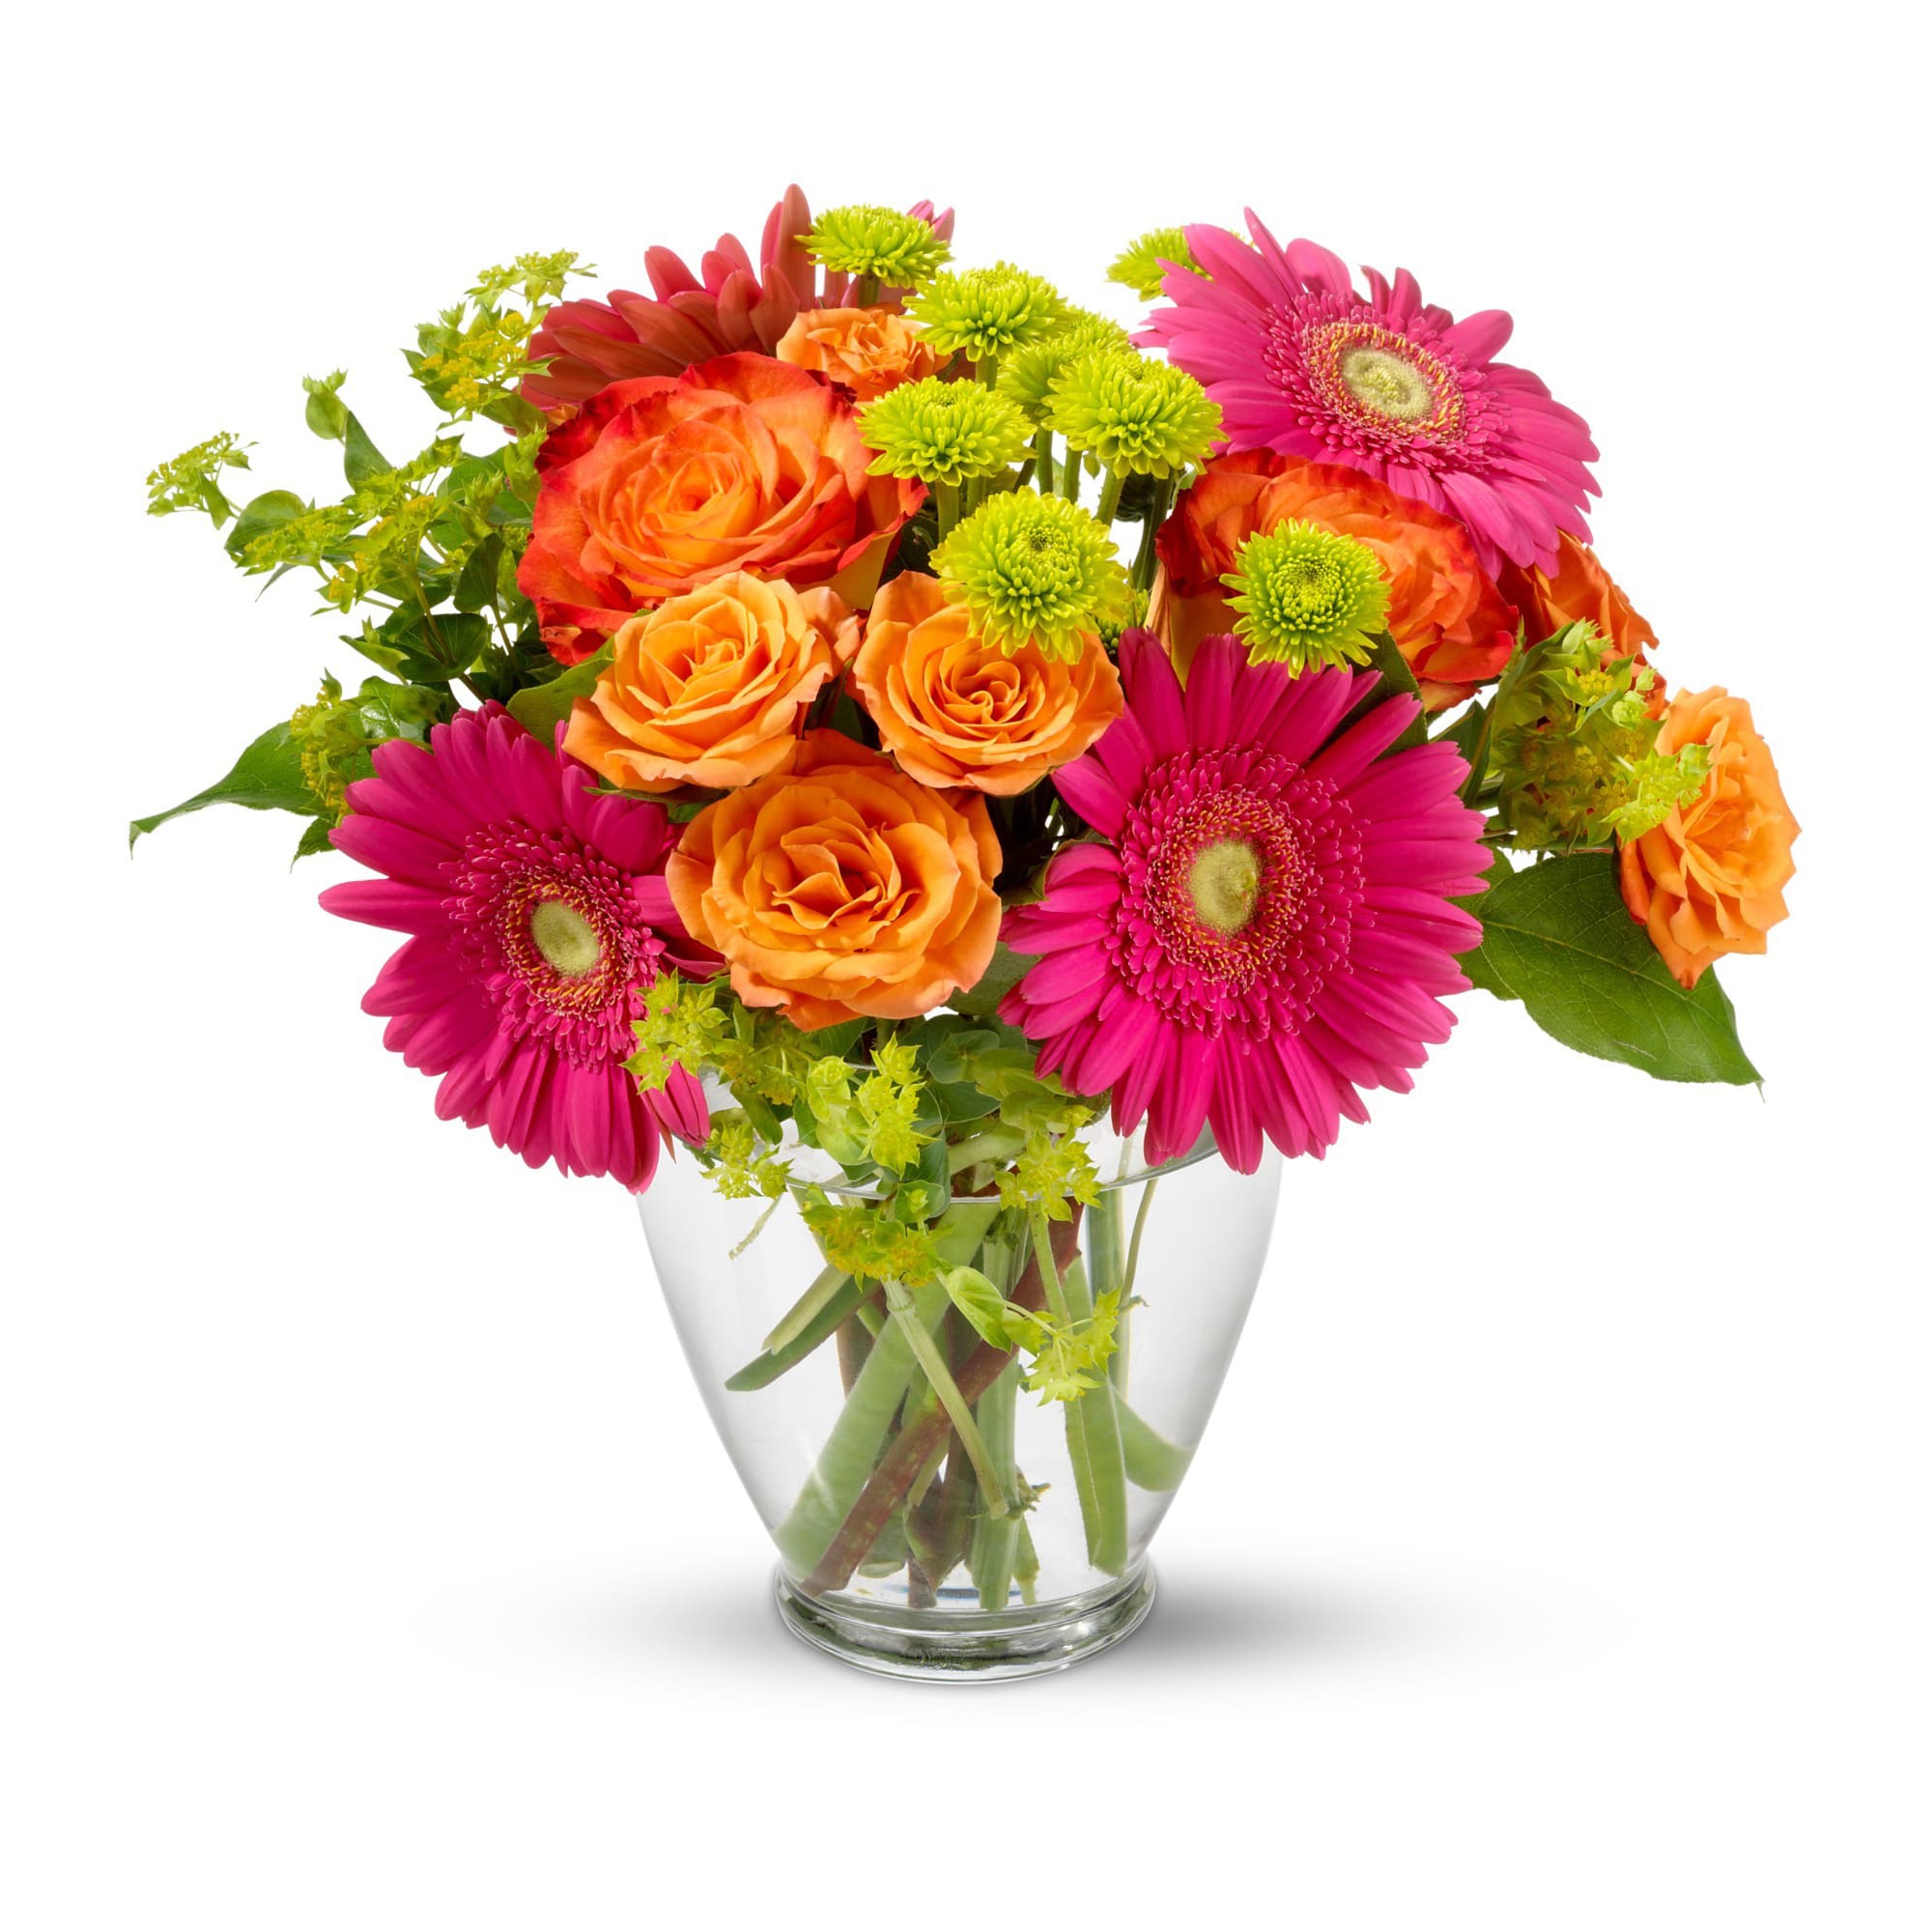 Poppin' Pastels - Hot fun in the summertime is here, and it's flowerific to be sure! This beautiful bouquet brings together a rainbow of the season's brightest blossoms.